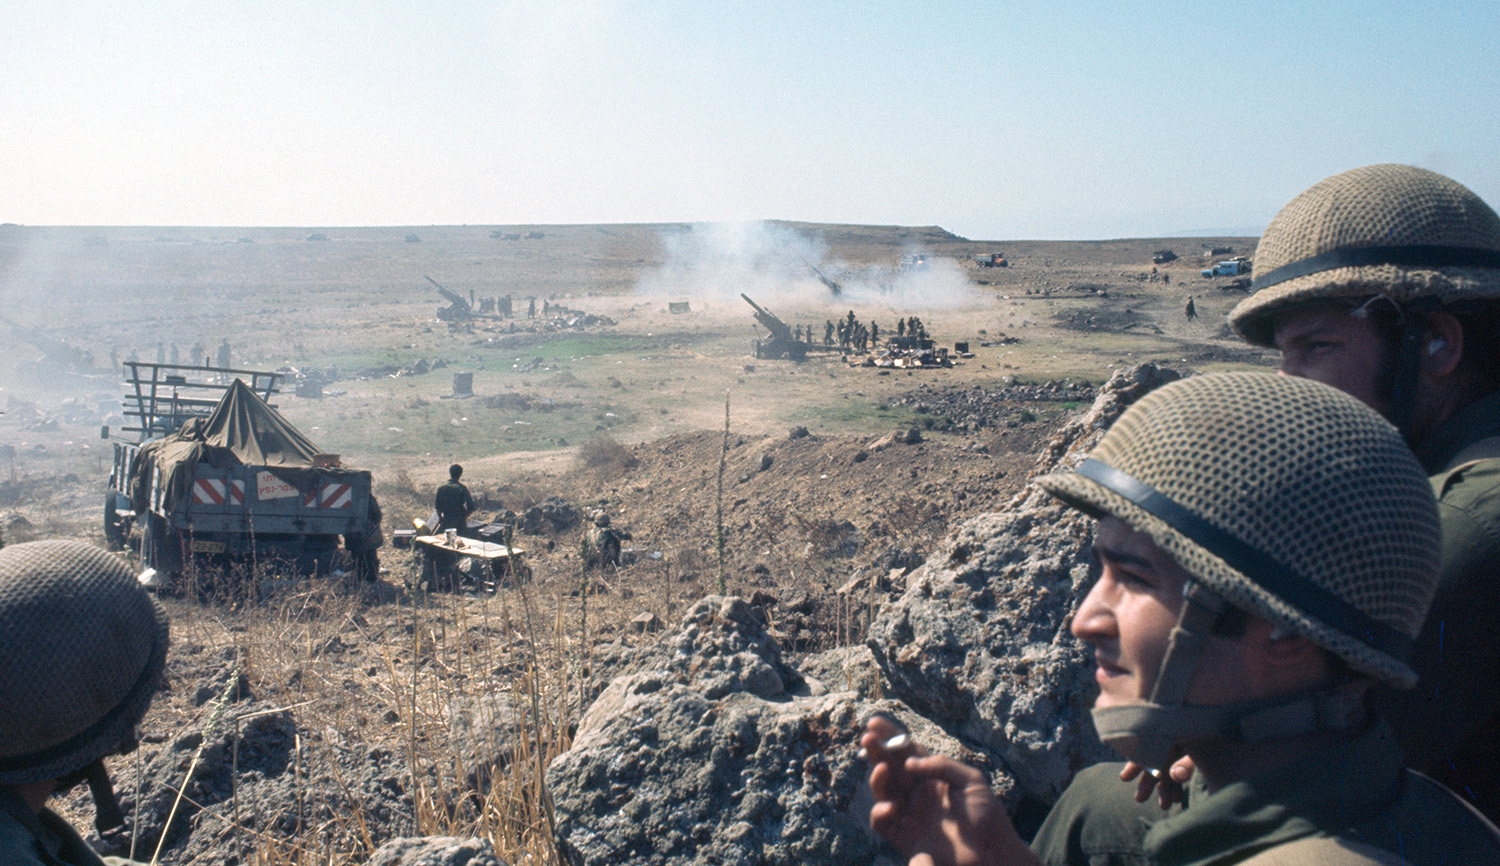 
An Israeli artillery installation at the Golan Heights during the Yom Kippur War in October 1973. Terry Fincher/The Fincher Files/Popperfoto via Getty Images.






